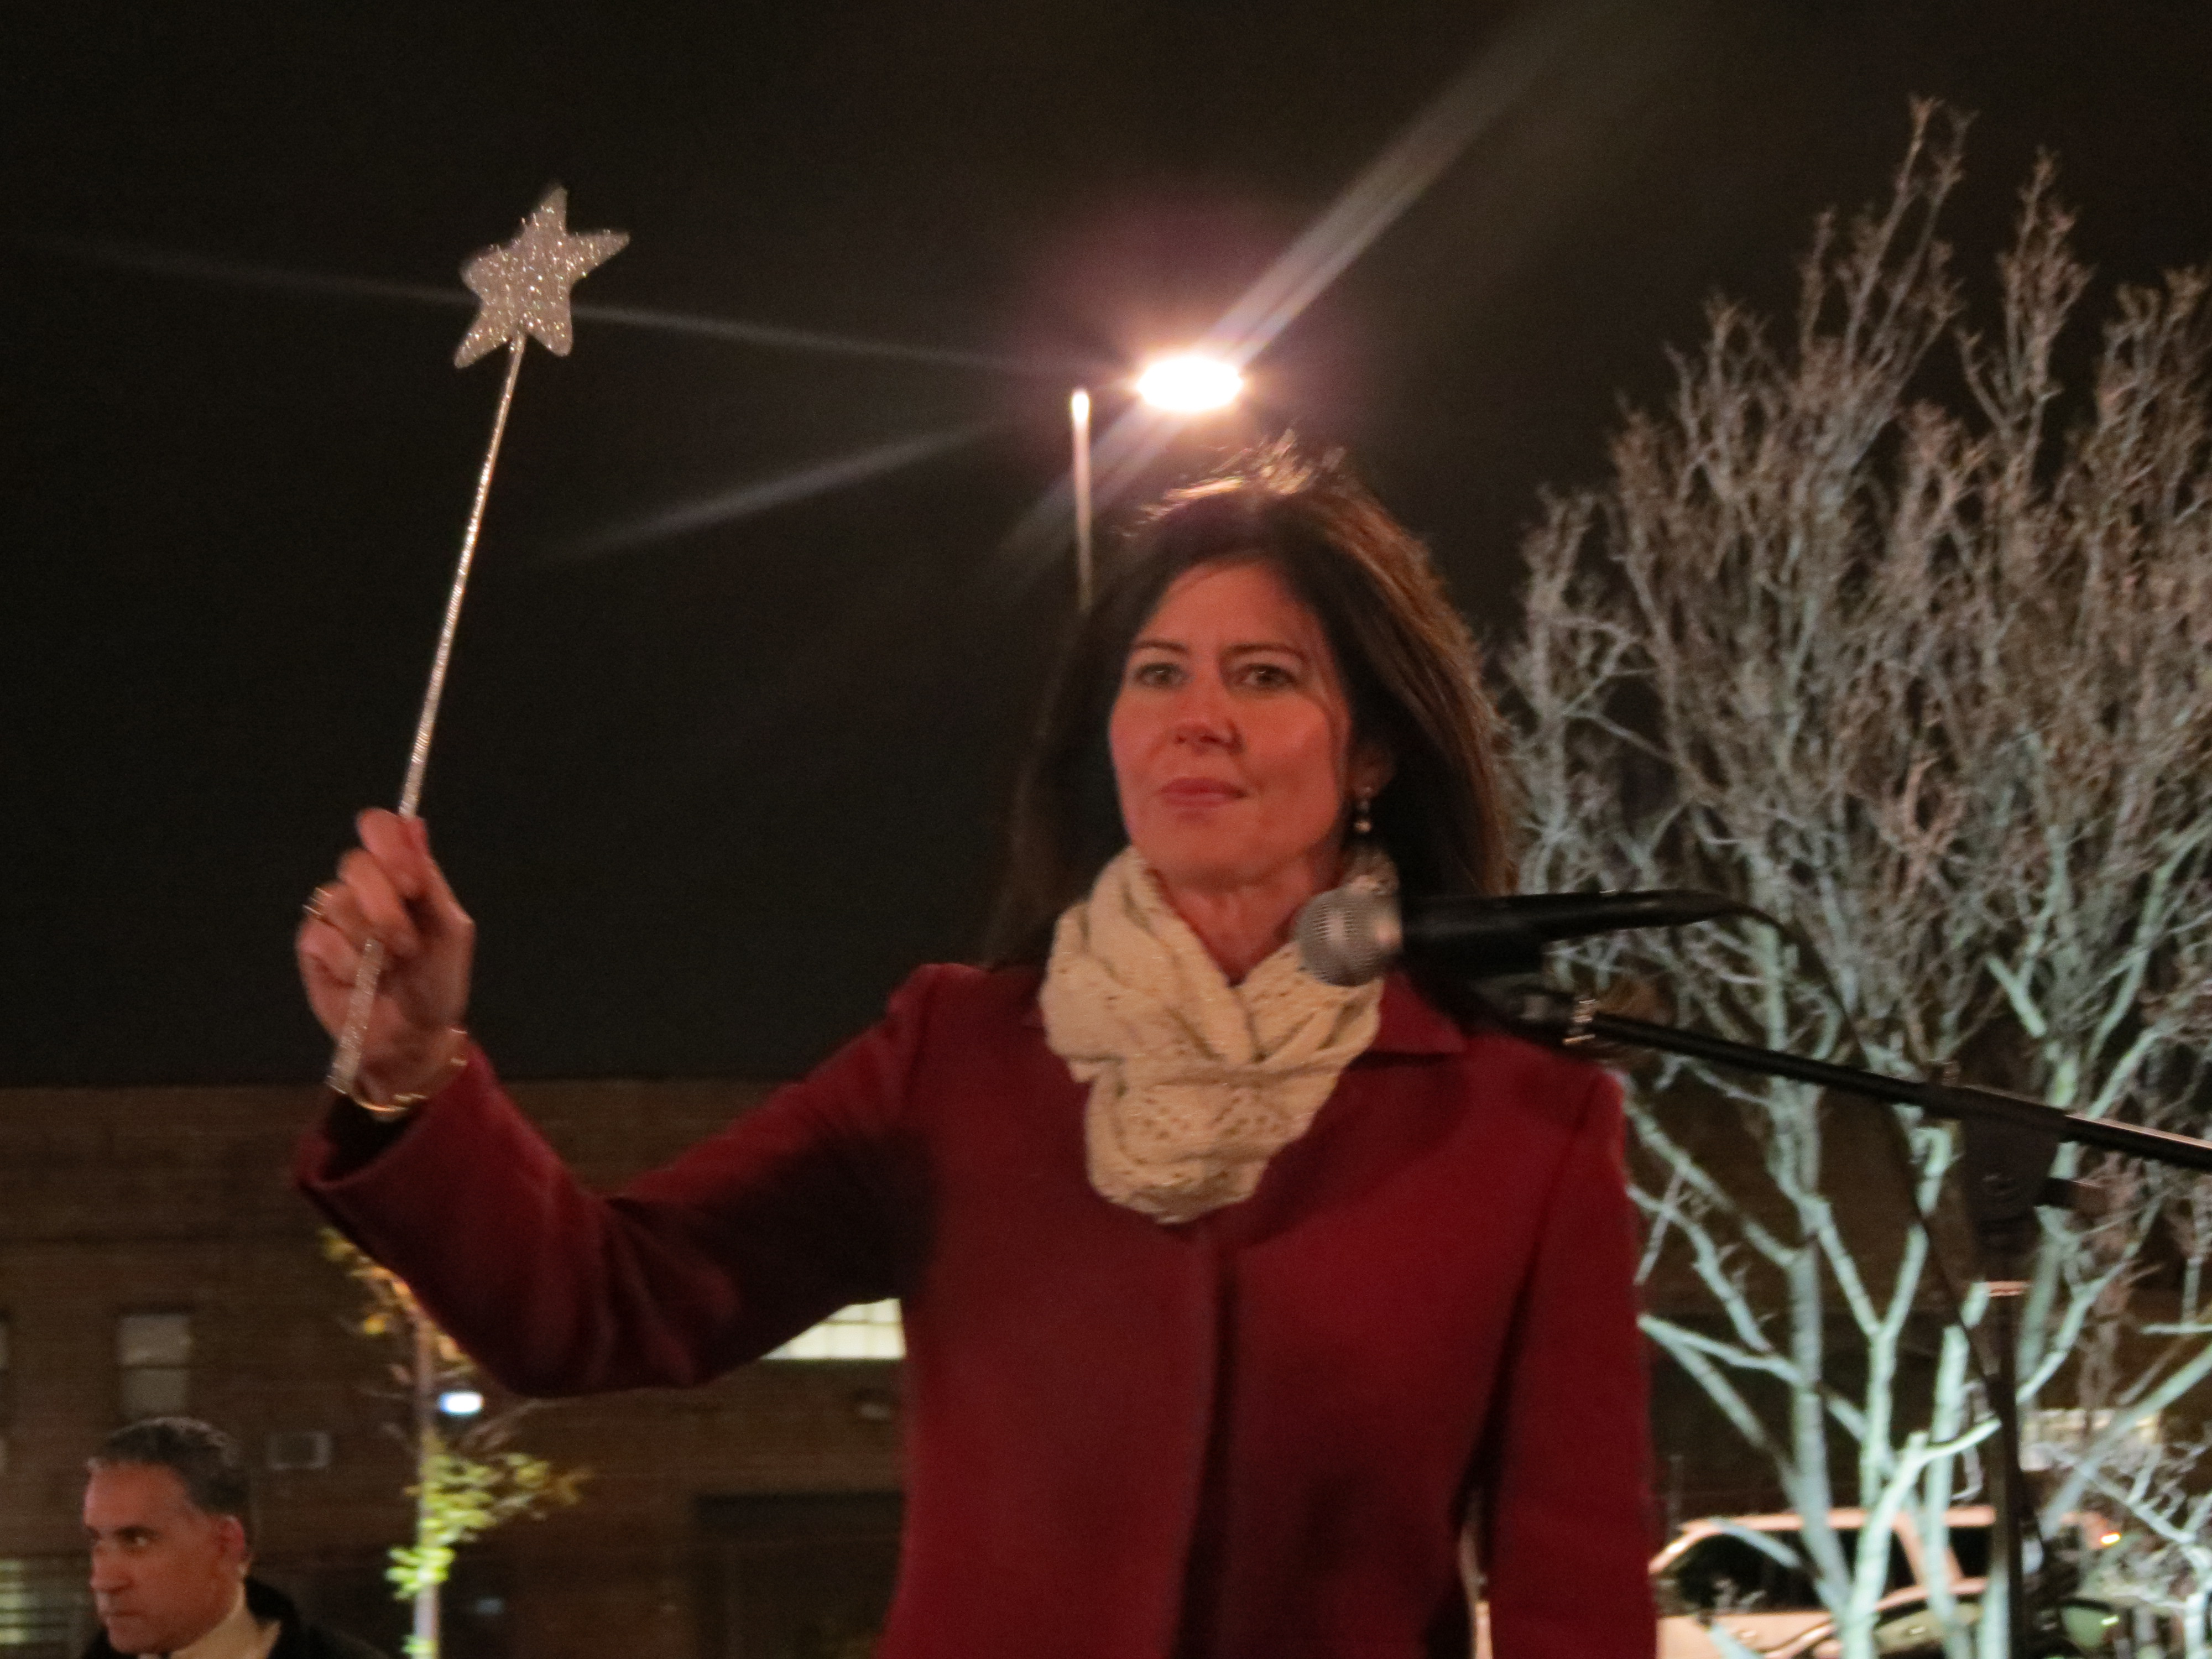 Councilwoman Elizabeth Crowley wished the crowd a happy holiday season at the tree lighting ceremony.